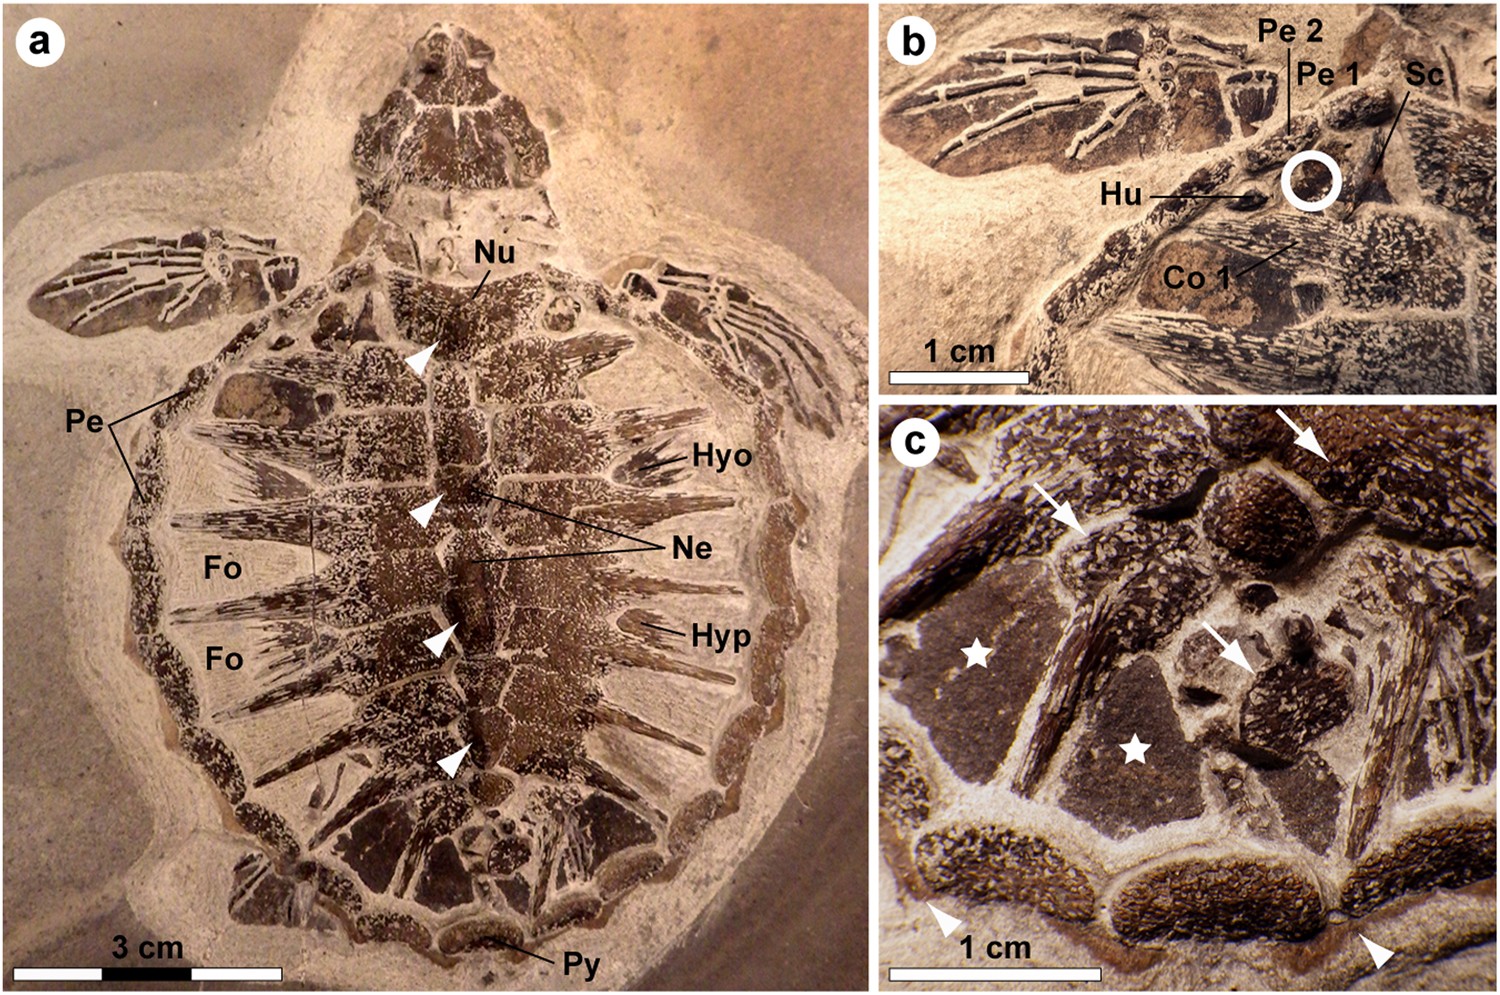 Biochemistry and adaptive colouration of an exceptionally preserved juvenile fossil sea turtle | Scientific Reports